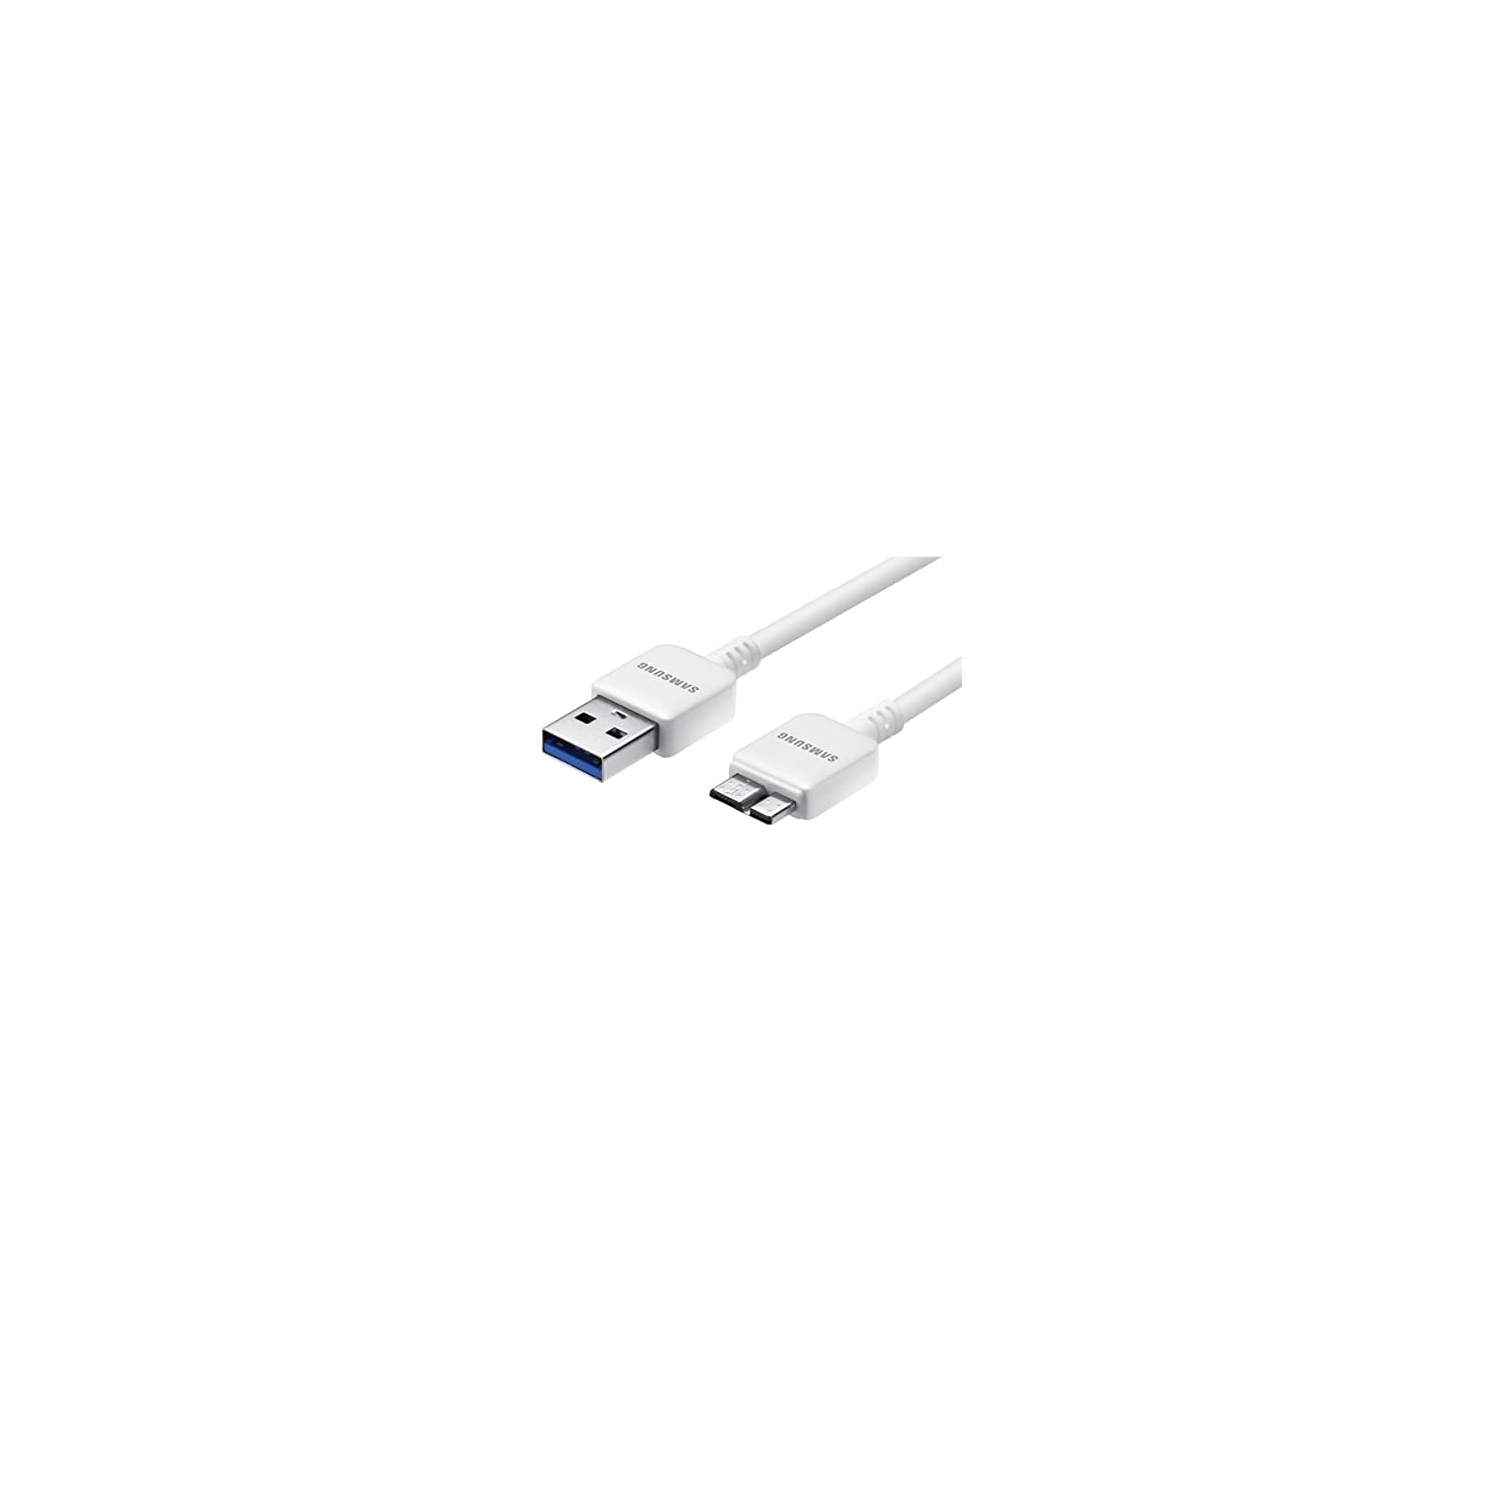 Samsung 3.3Ft/1M Micro USB 3.0 Fast Charging Data Sync Cable for Samsung Galaxy S5 / Note 3, White